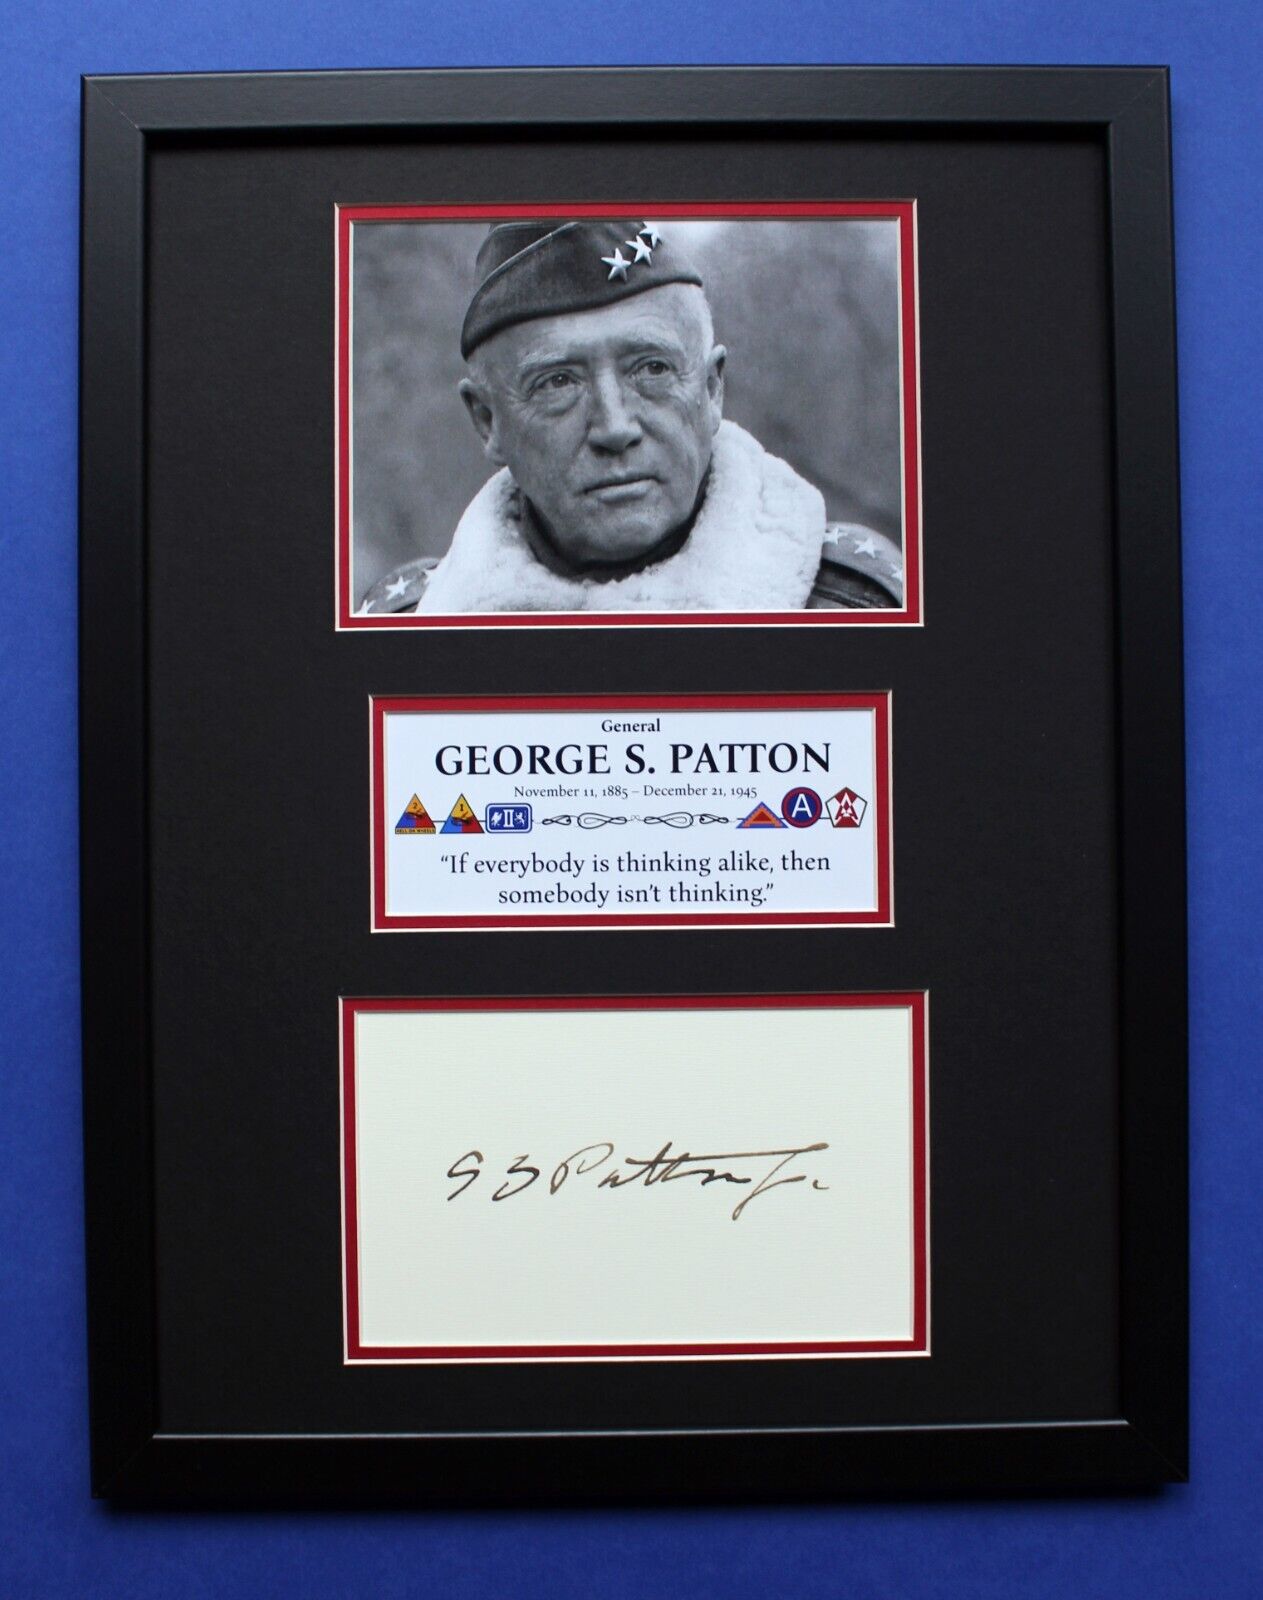 GEORGE S. PATTON AUTOGRAPH framed artistic display WW2 General